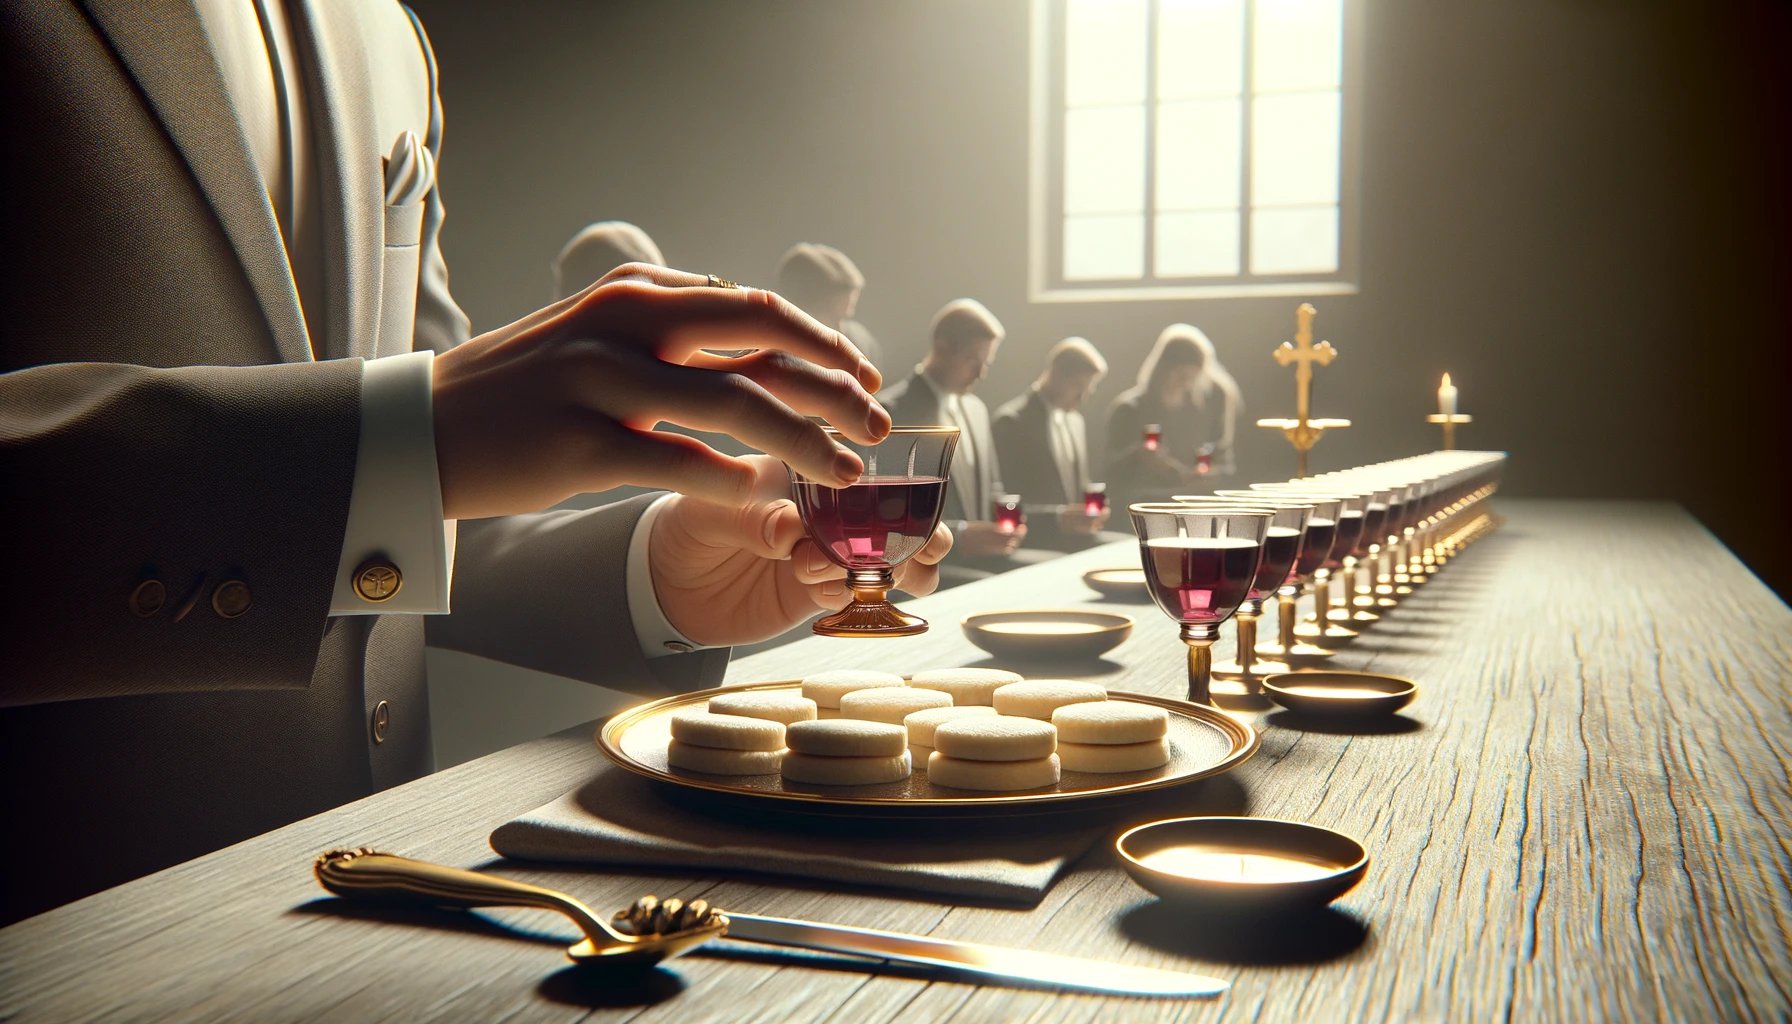 How To Prepare The Communion Table At A Baptist Church